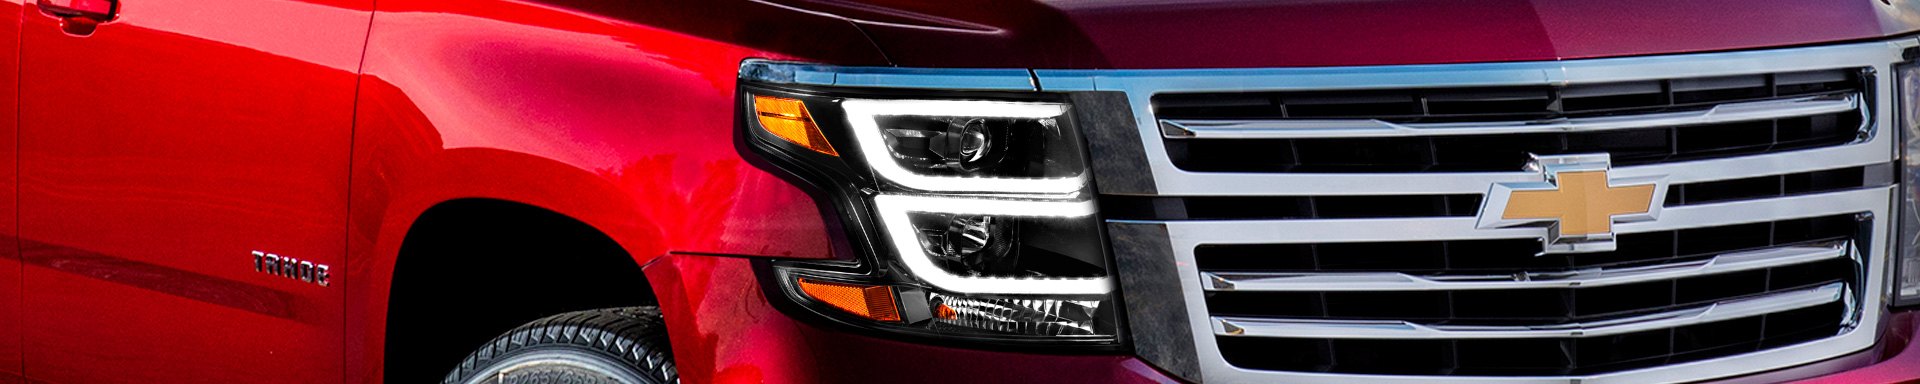 Improve Road Visibility With CG LED DRL Headlights For 15-20 Tahoe / Suburban